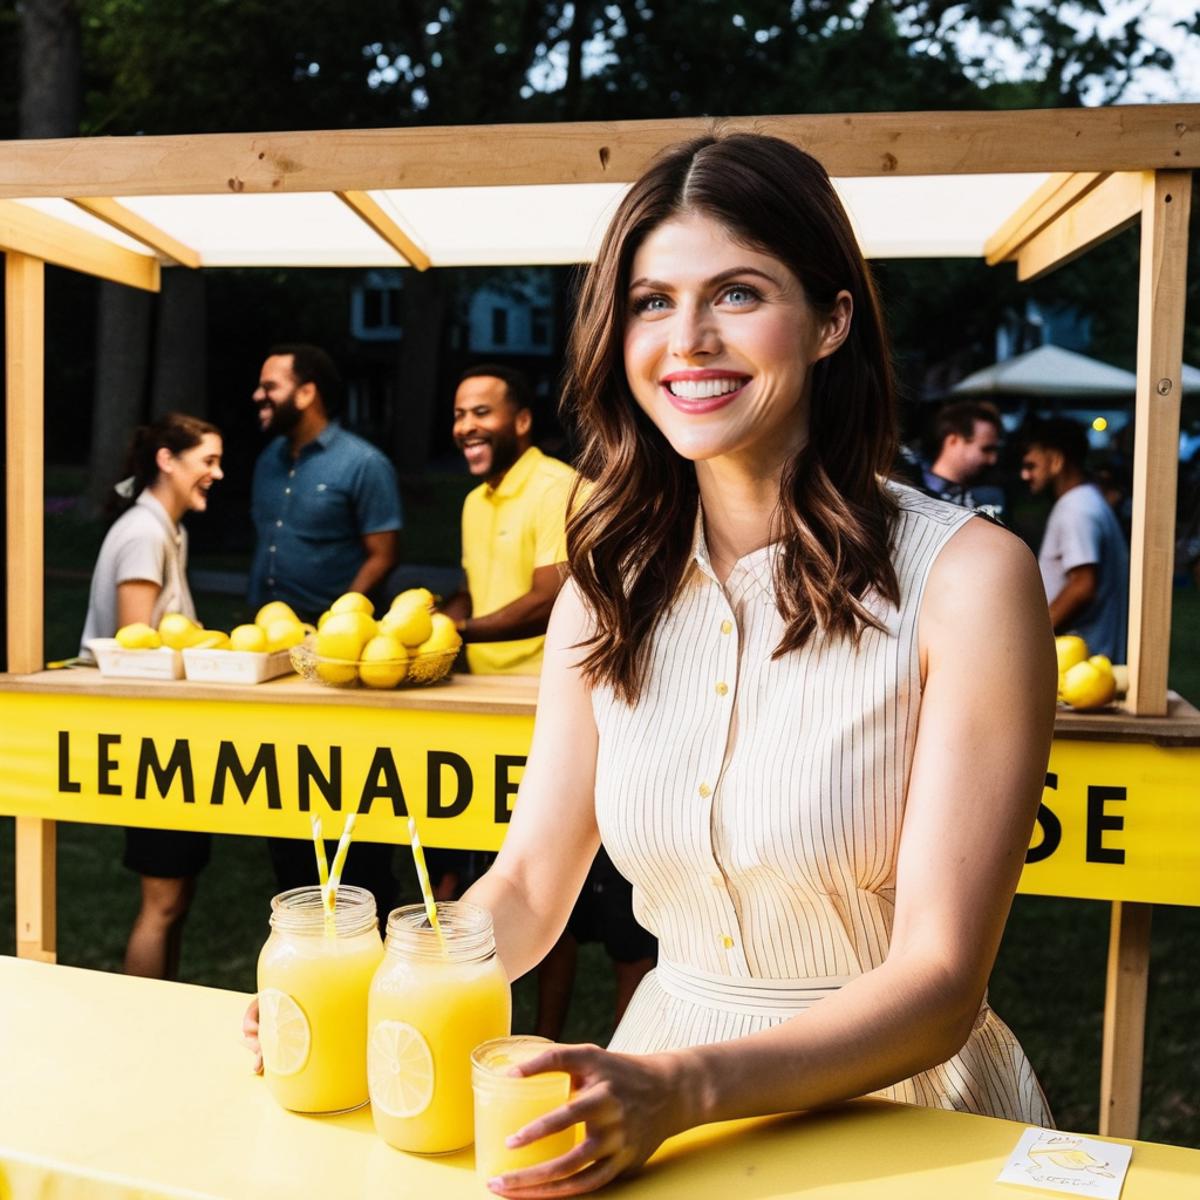 A woman smiling and holding glasses of lemonade.